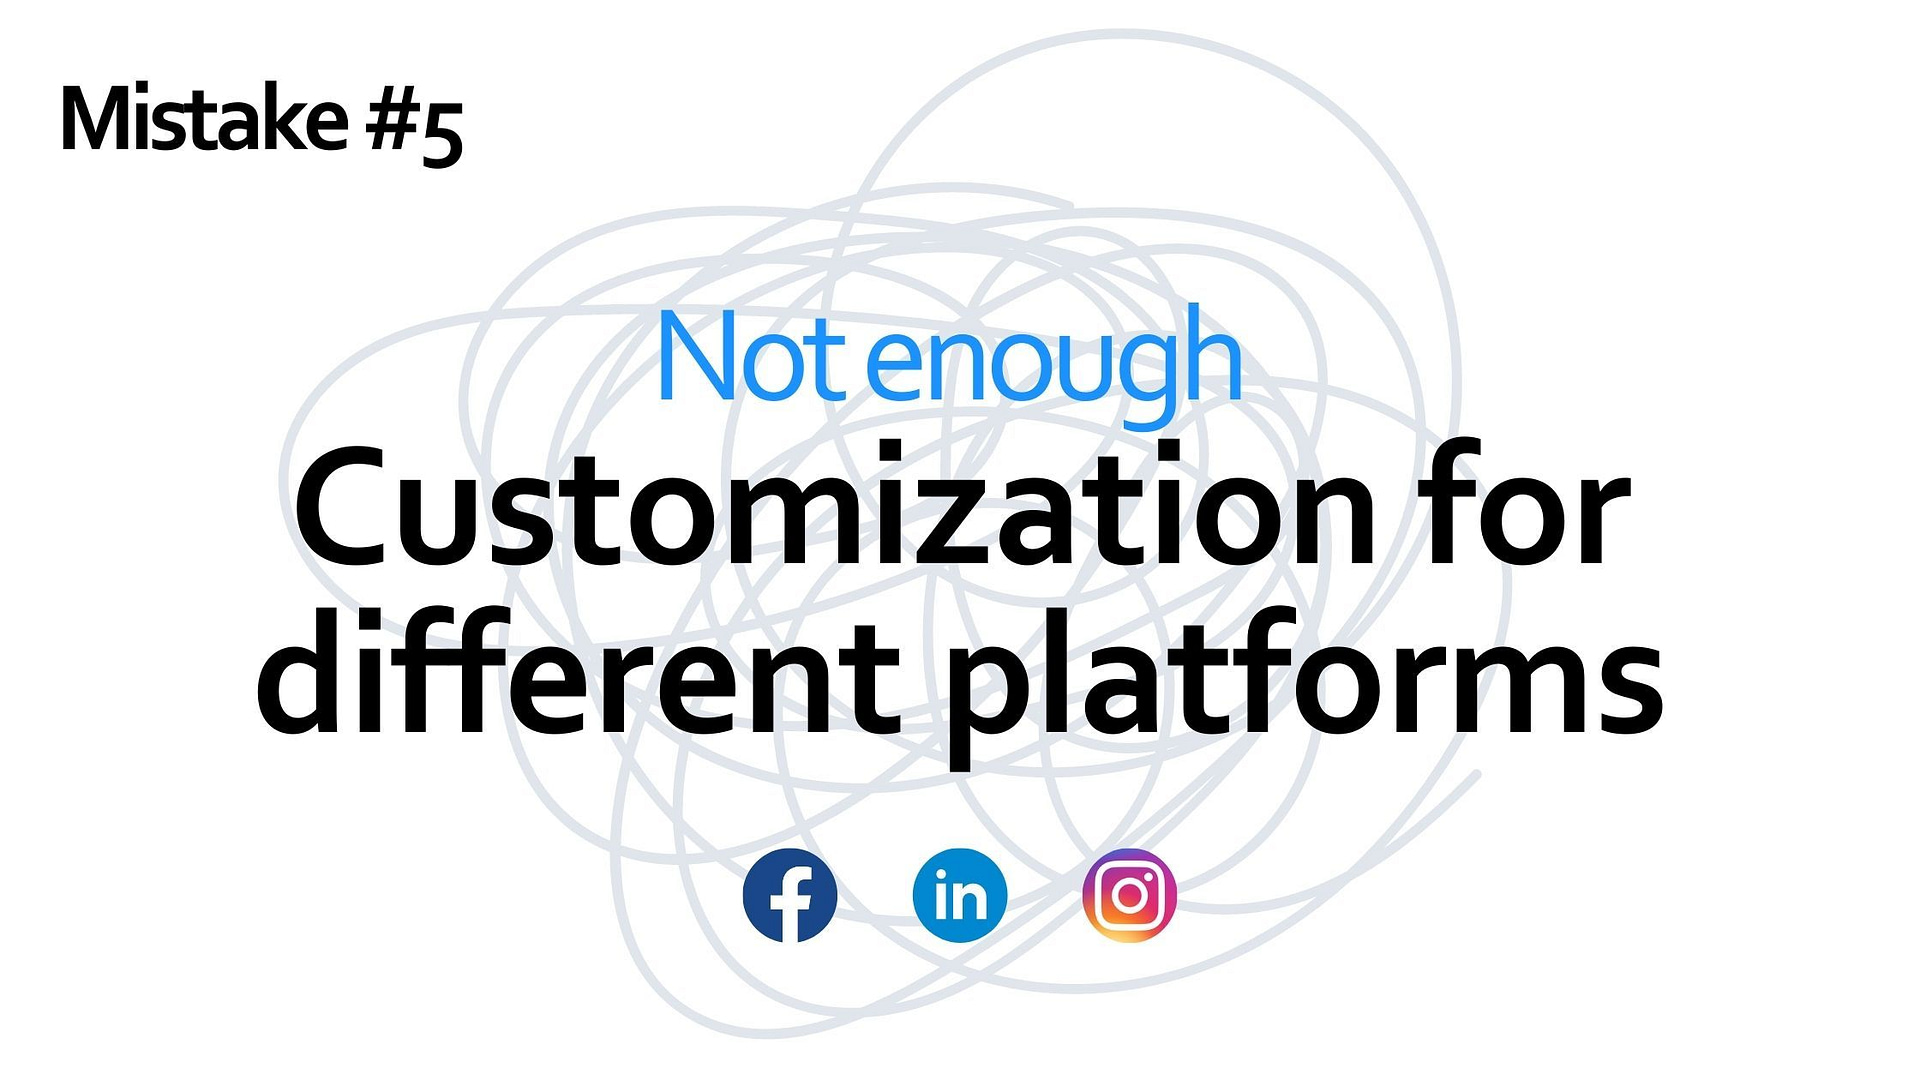 Mistake #5 - not enough customization for different platforms